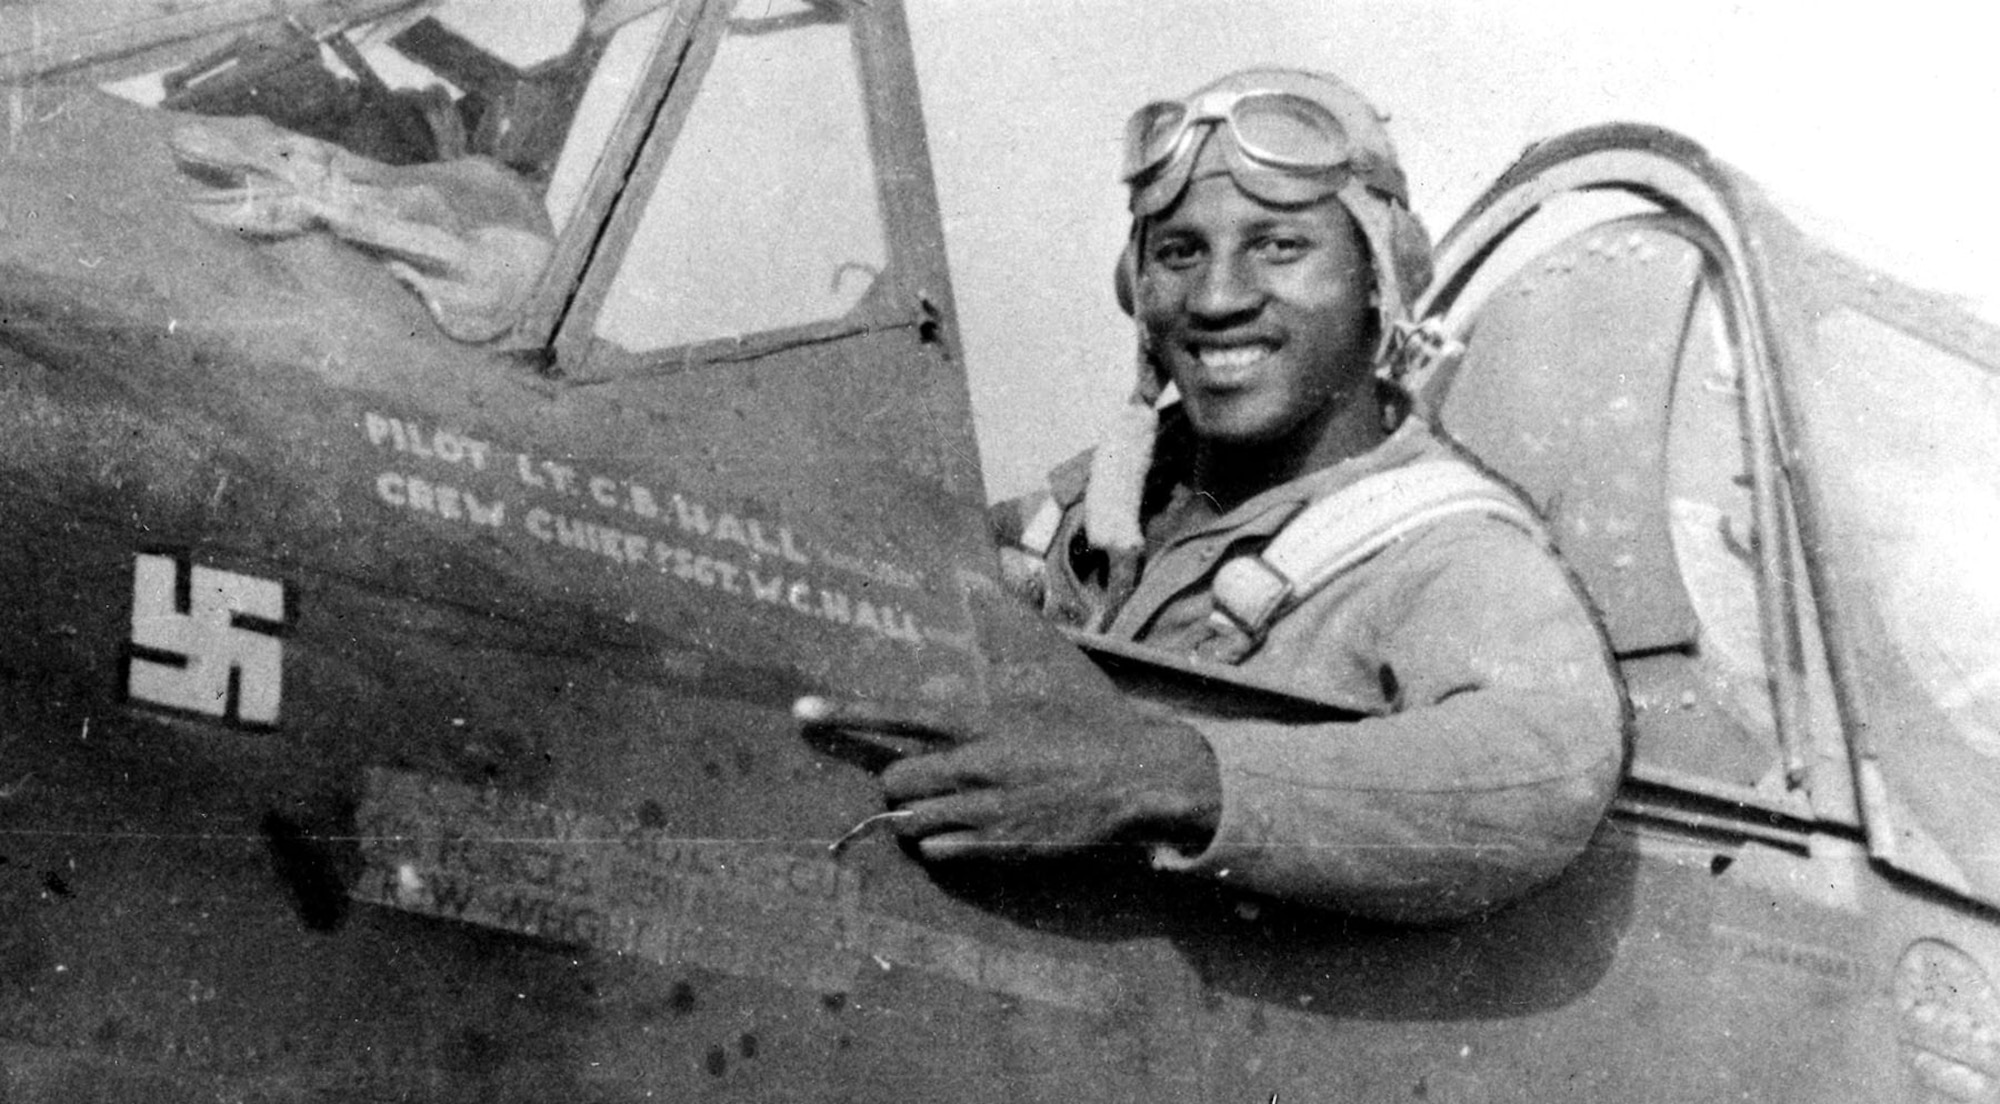 While escorting B-25 Mitchell bombers over Sicily, 1st Lt. (later Maj.) Charles Hall scored the Tuskegee Airmen’s first aerial victory. Seated in the cockpit of his P-40L Warhawk, Hall points to his freshly painted “kill” marking. (U.S. Air Force photo)